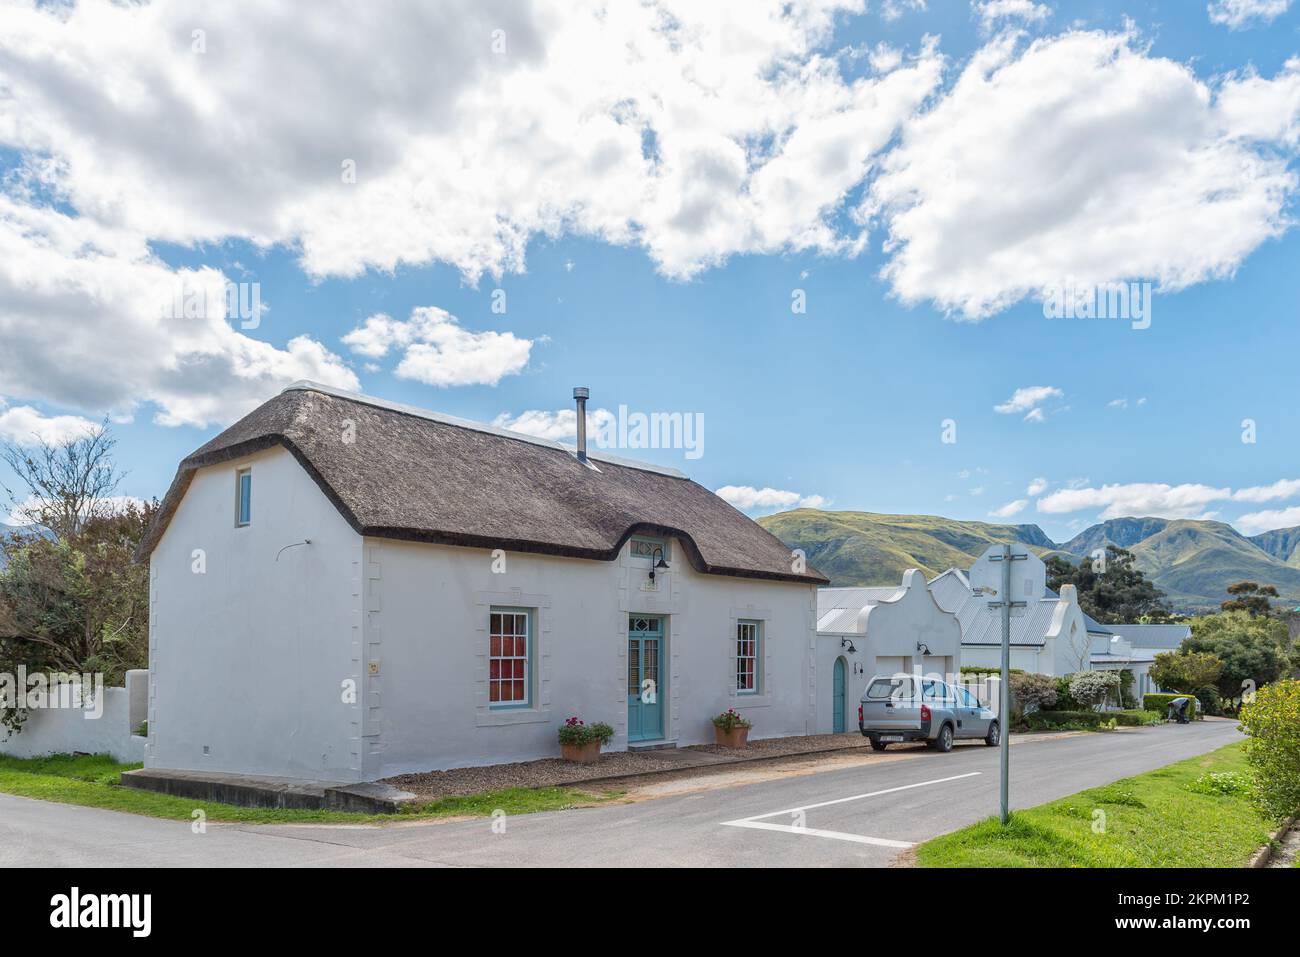 Stanford, South Africa - Sep 20, 2022: A street scene, with historic houses, in Stanford in the Western Cape Province Stock Photo